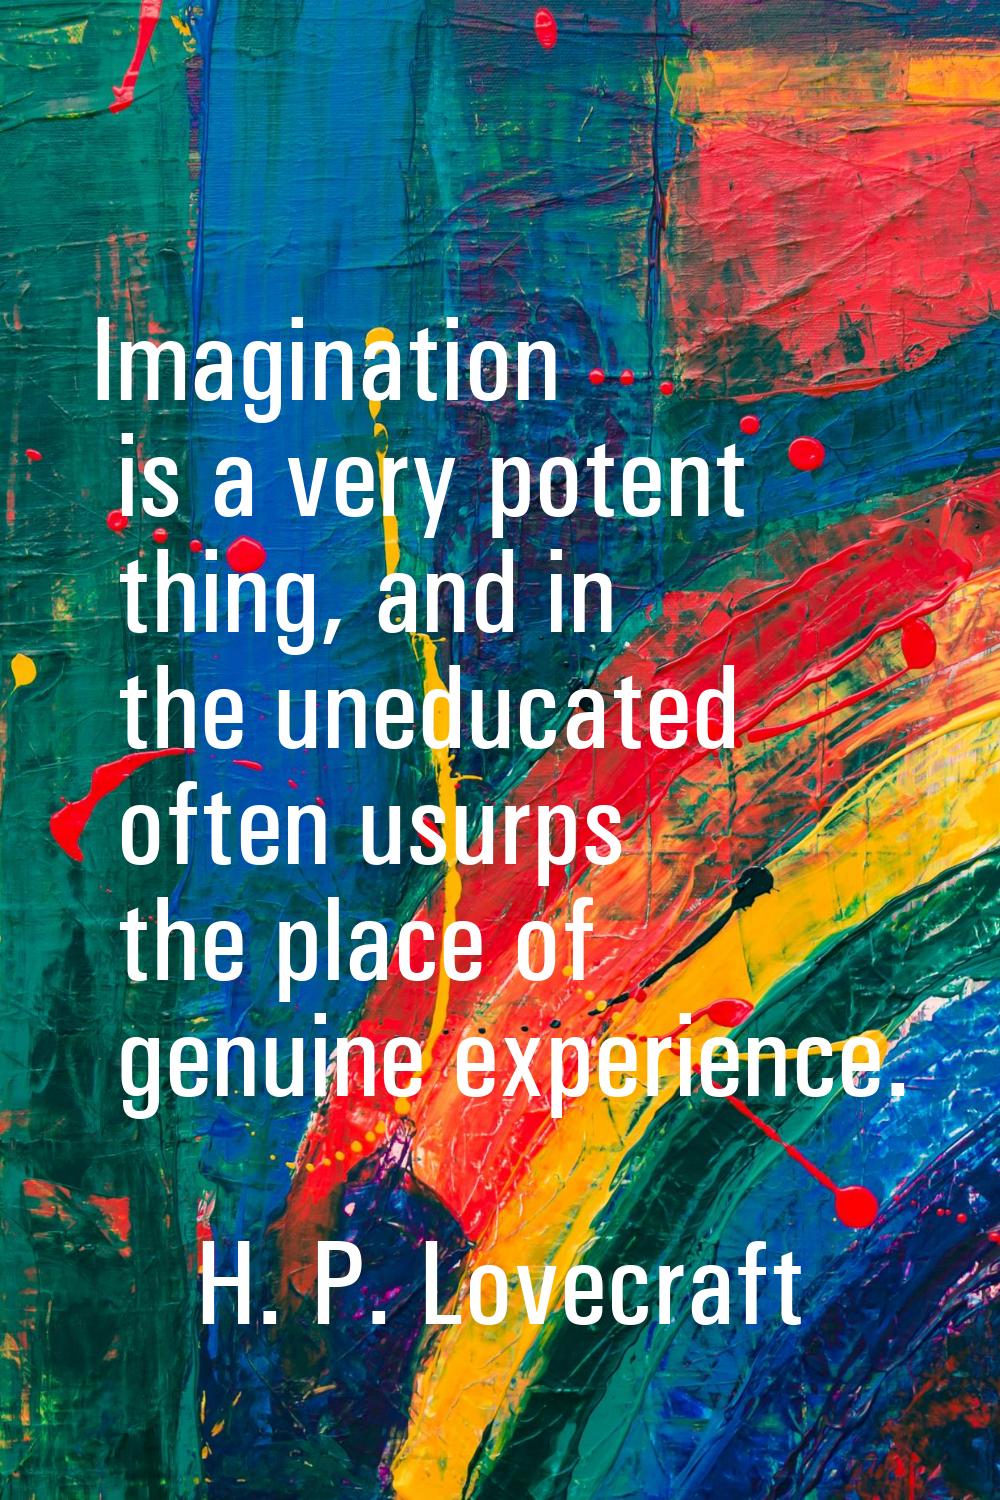 Imagination is a very potent thing, and in the uneducated often usurps the place of genuine experie